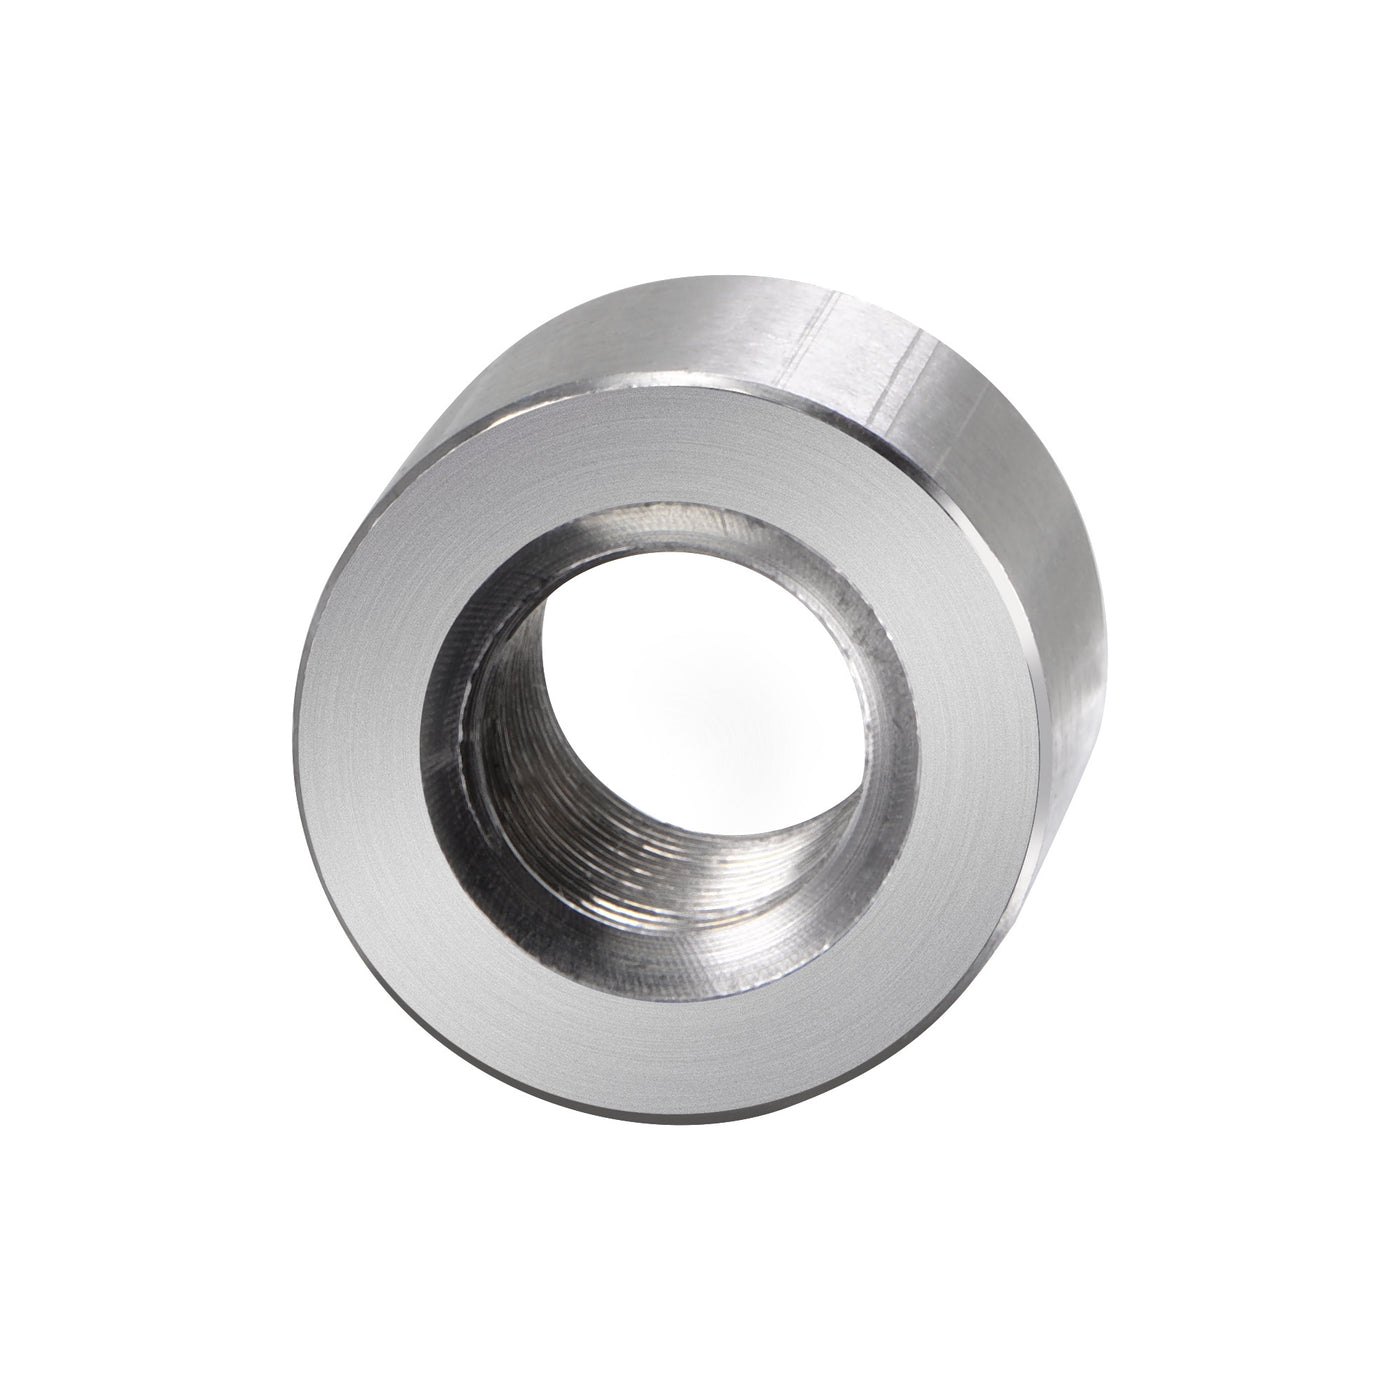 Uxcell Uxcell G3/4 Weld On Bung Female Nut Threaded - Stainless Steel  Insert Weldable